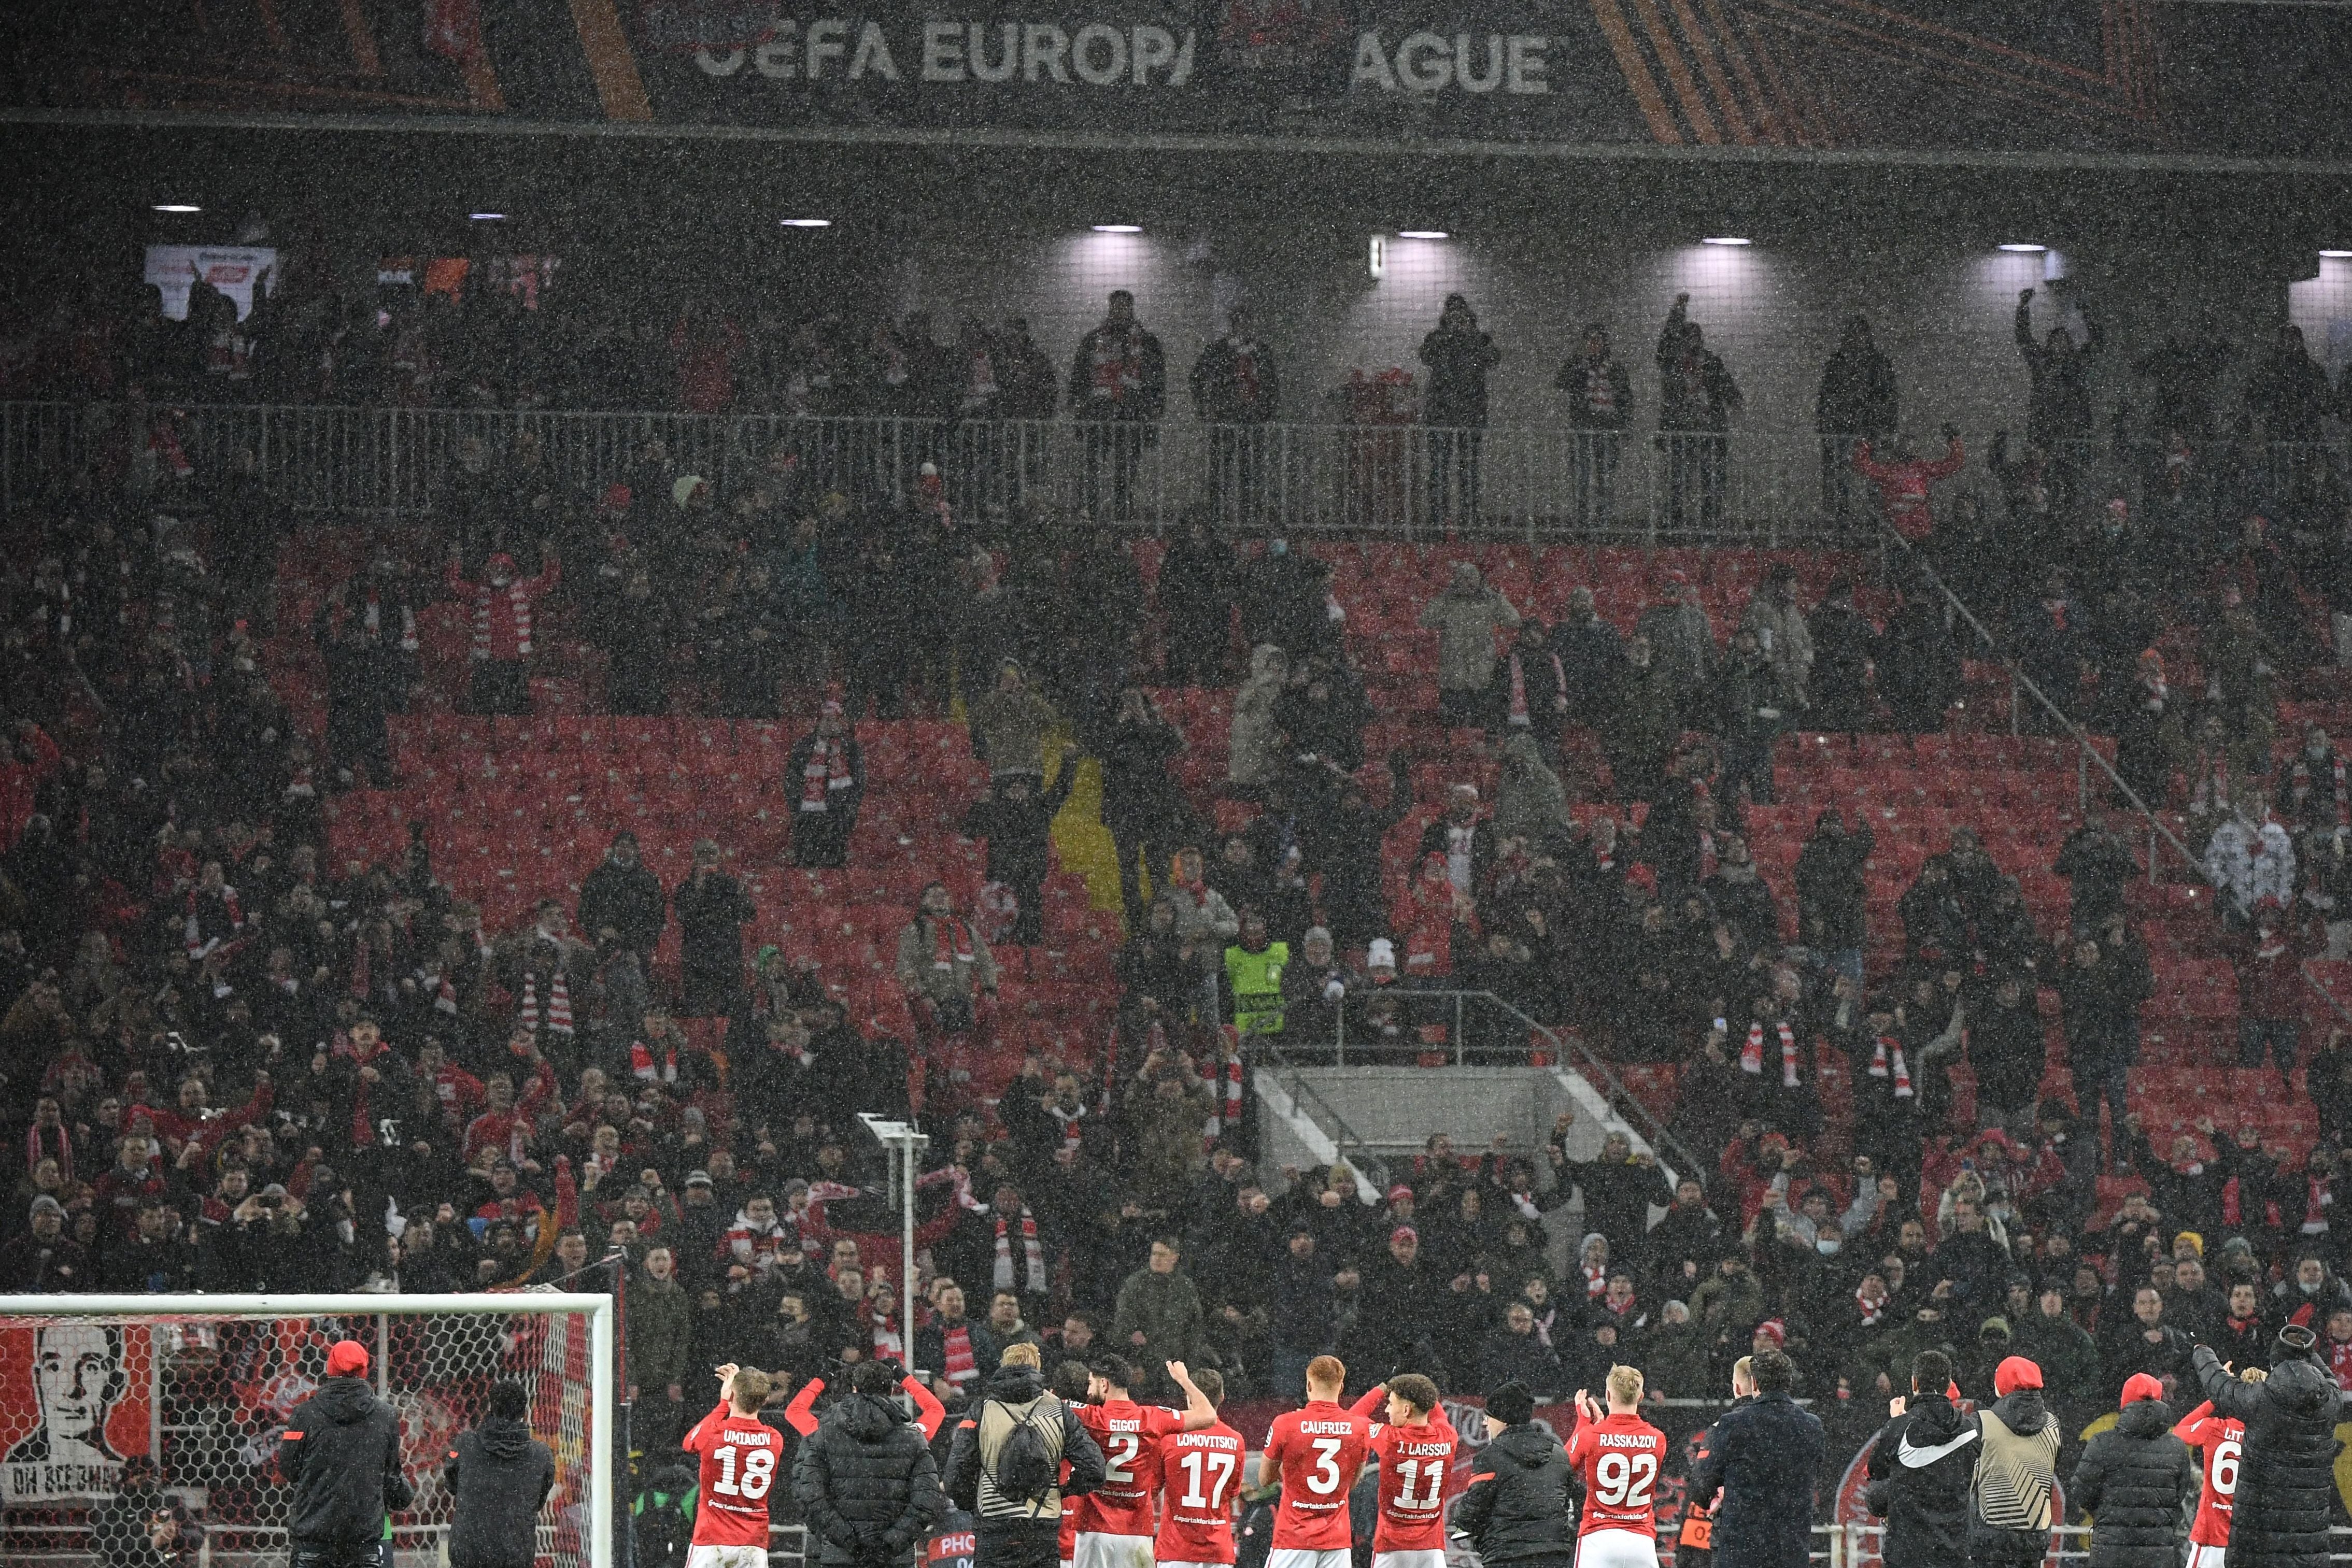 Spartak Moscow's players celebrate a home victory over Napoli in the Europa League last November